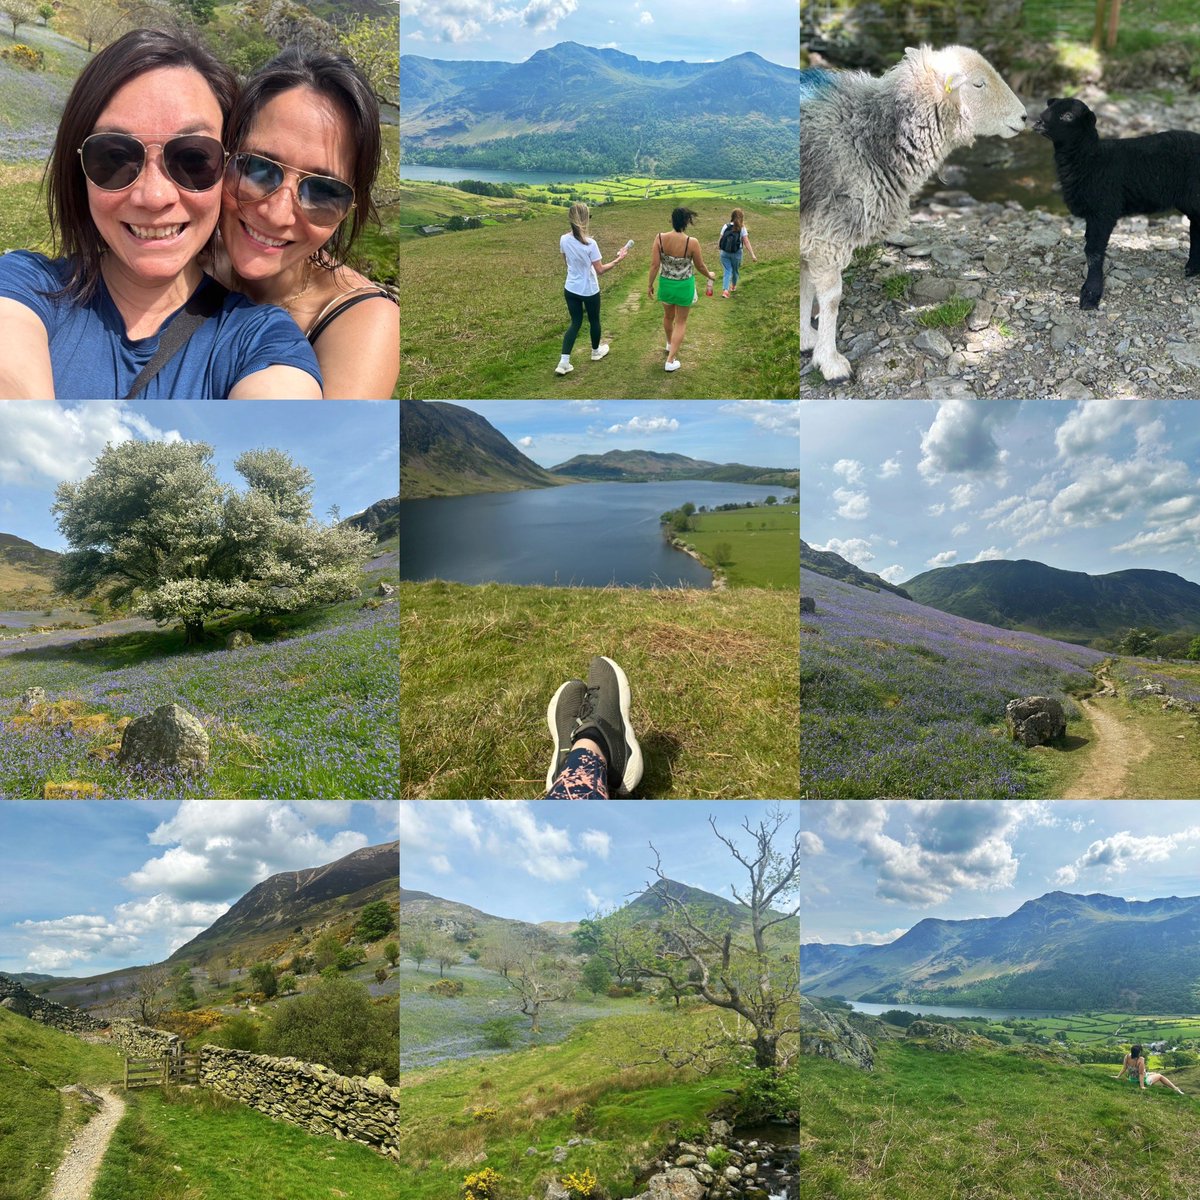 Beautiful weekend in the #LakeDistrict with the girls! 🐑🌿🪻☀️ #everyweekendlikeaholiday 🥰